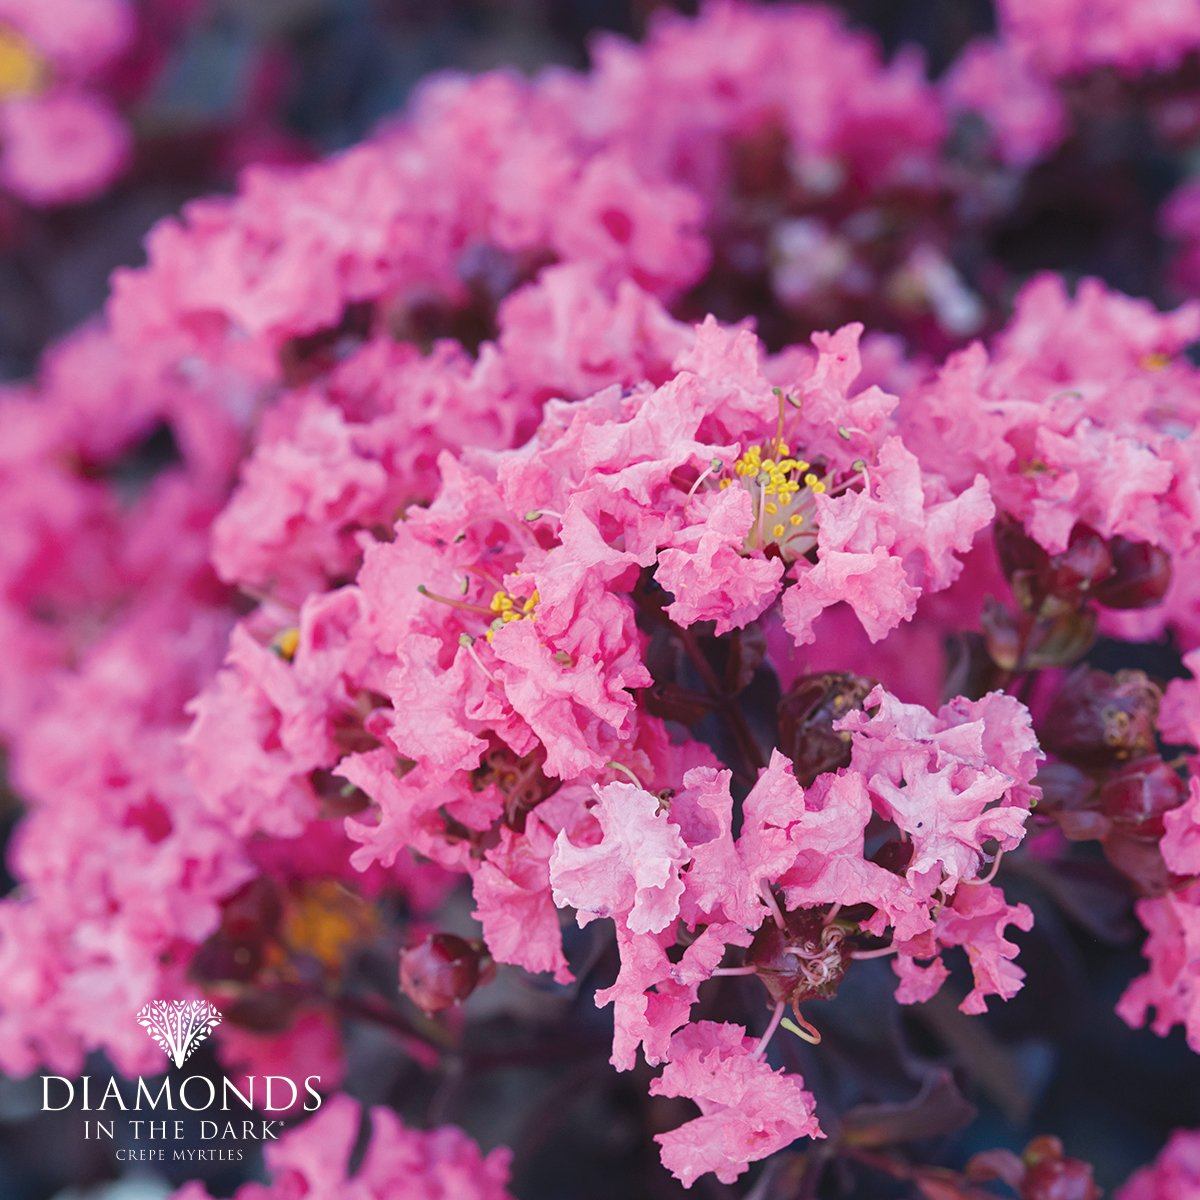 Lagerstroemia Diamonds in the Dark® 'Shell Pink' has soft, but vivid pink blooms that really pop against its dark purple to black leaves.